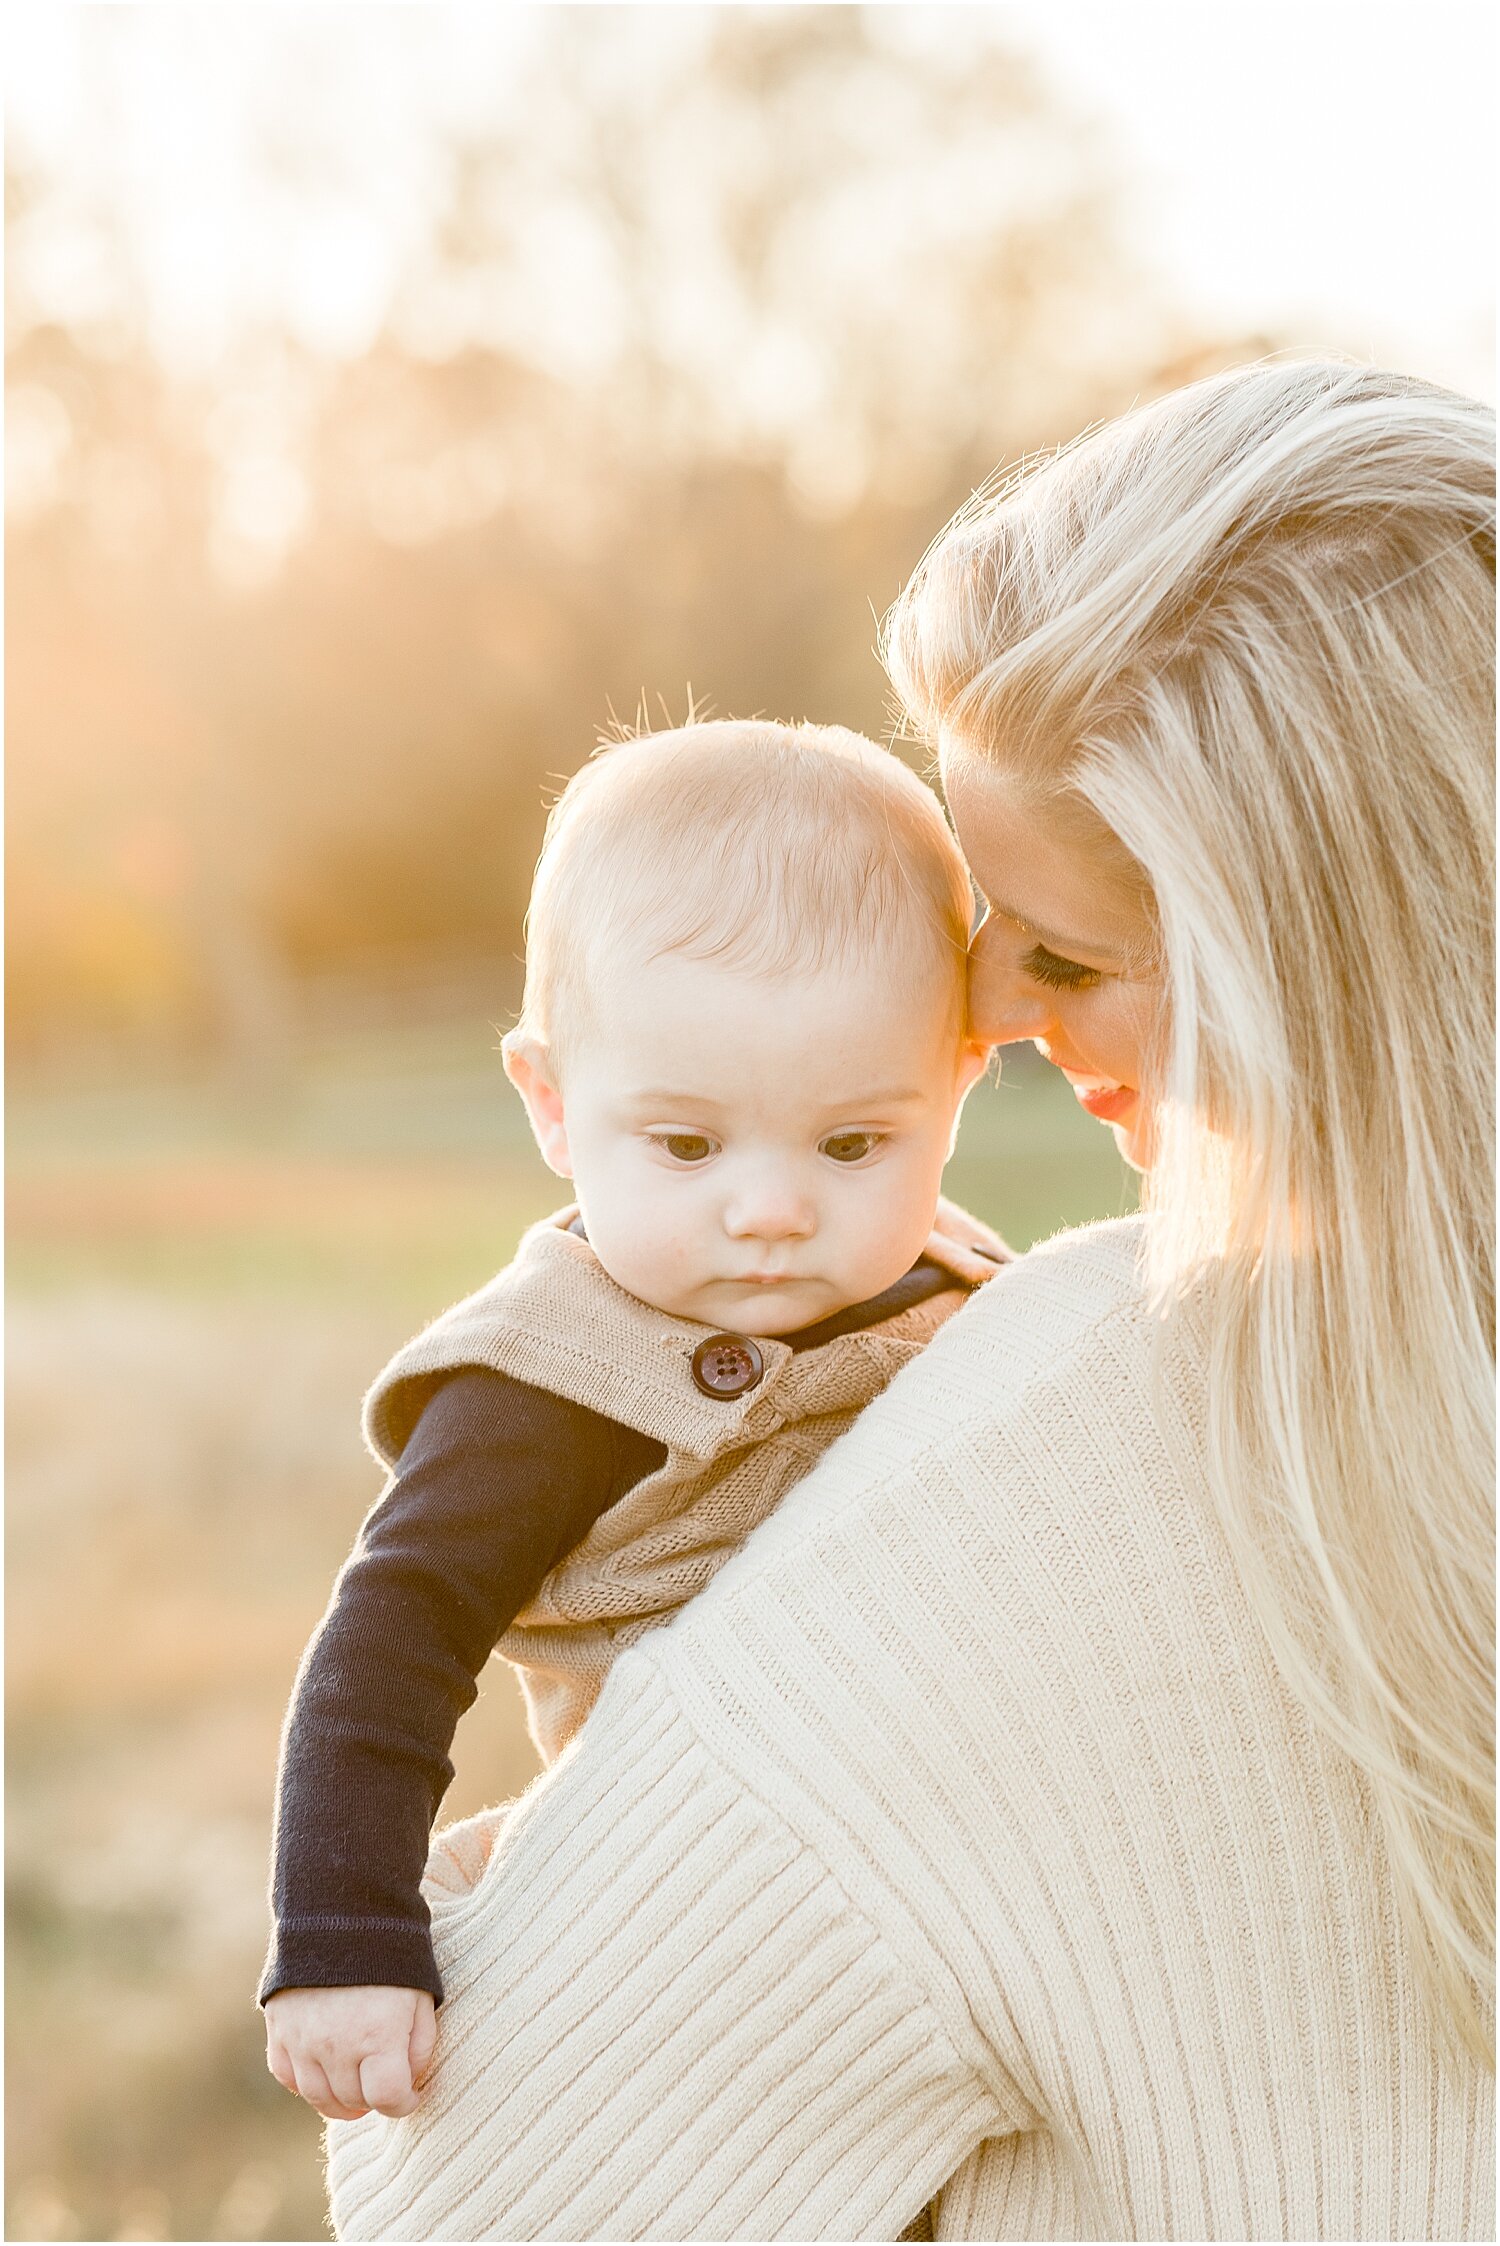 Mom + baby boy during milestone session with New Canaan Photographer, Kristin Wood Photography.